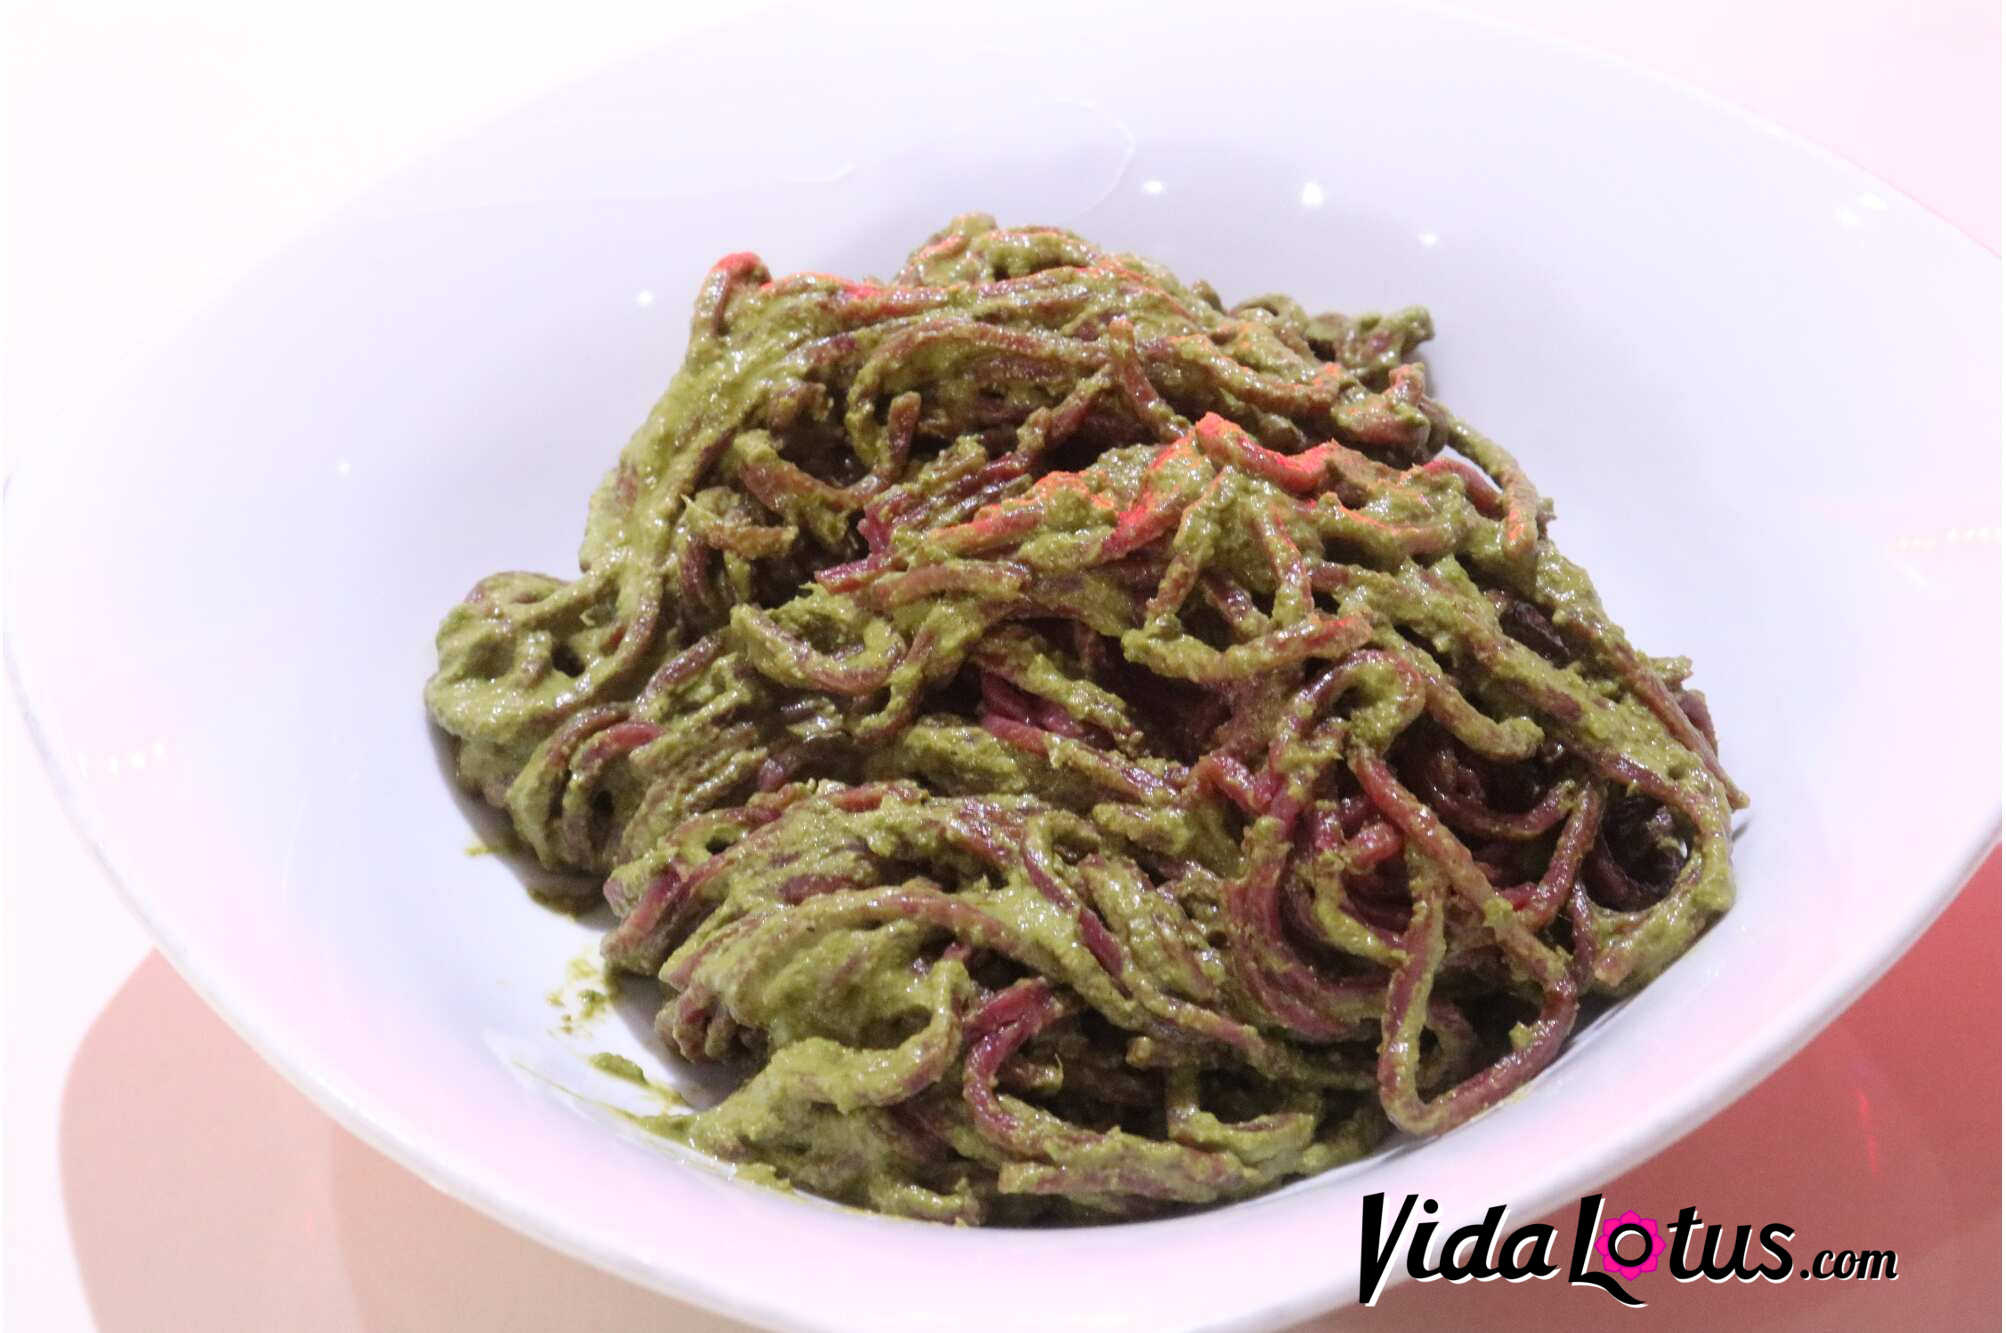 Beet-Wheat homemade Spaghetti noodles topped with Basil Pesto